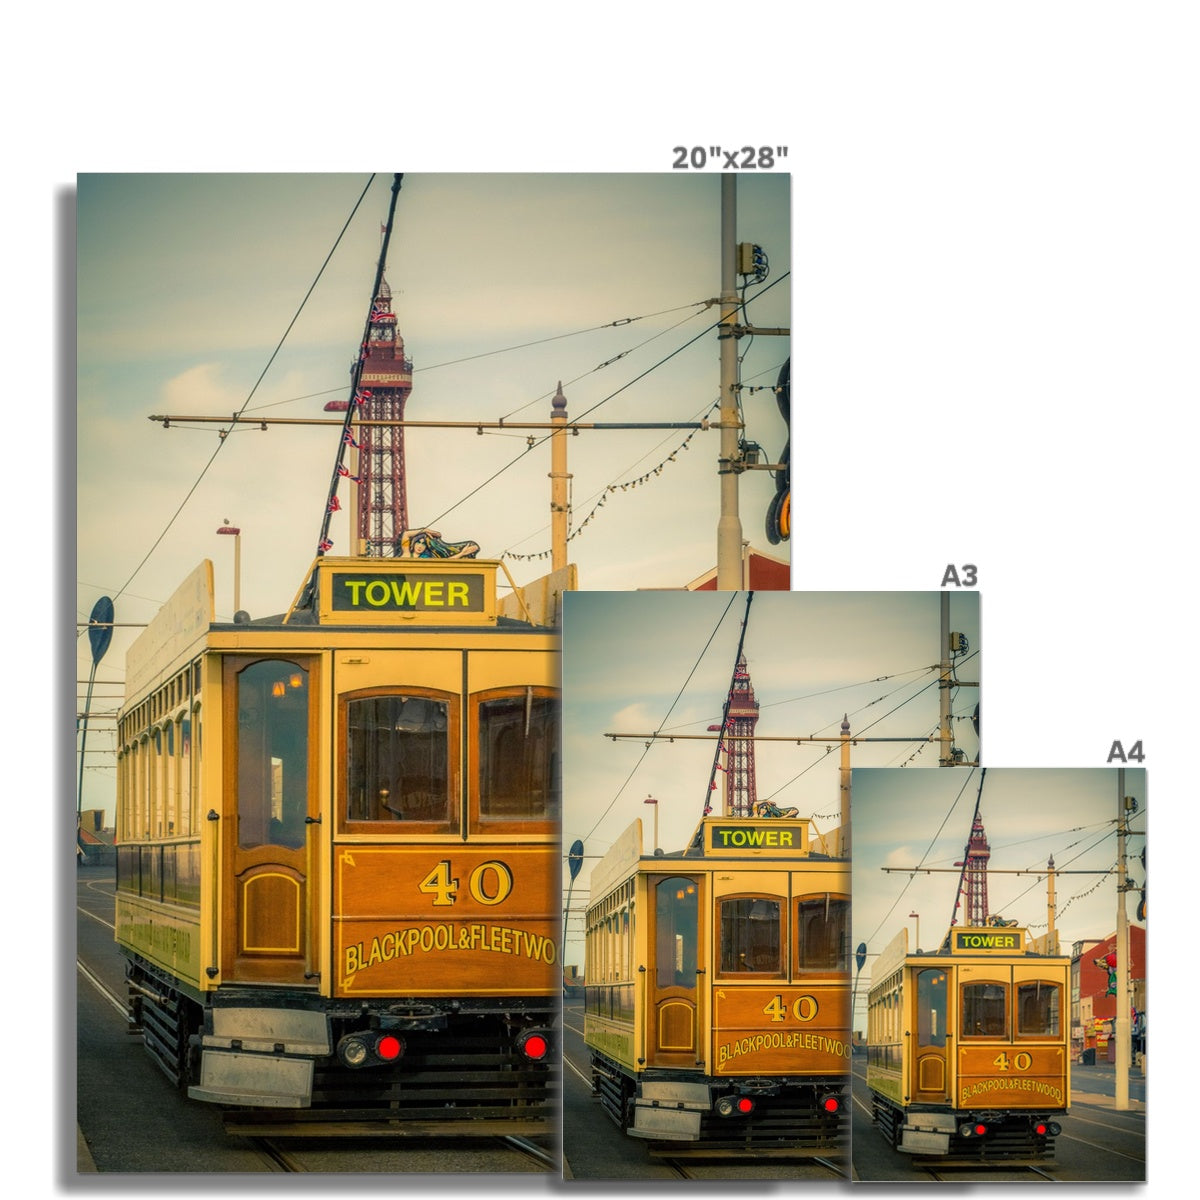 Traditional tram running along seafront promenade with Blackpool Tower in background - Blackpool,UK. Fine Art Print